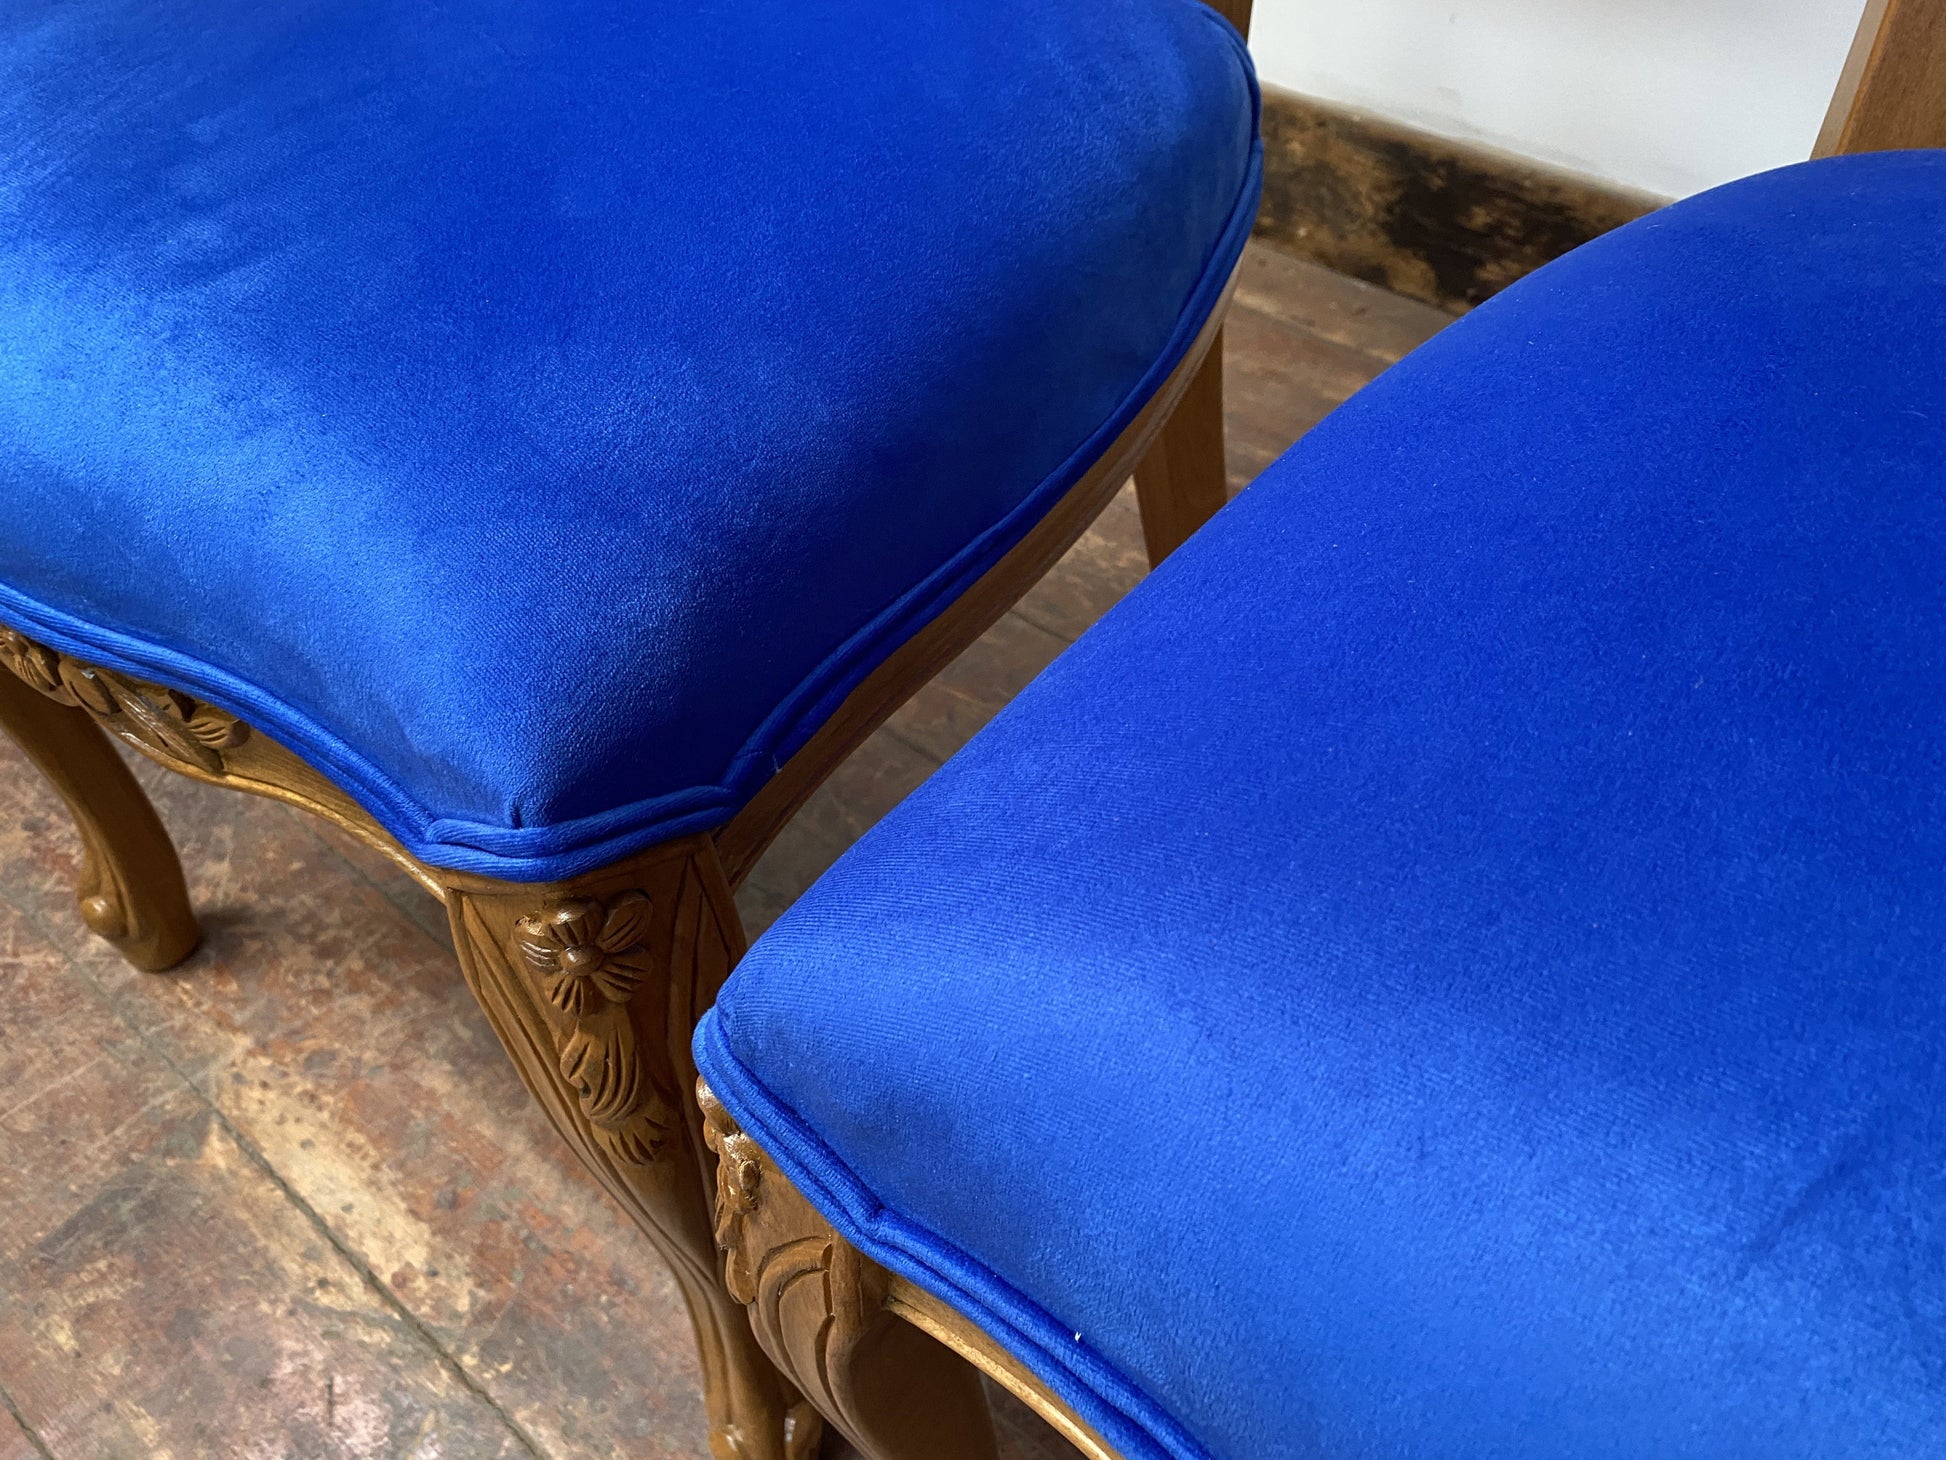 PAIR OF BLUE VELVET OCCASIONAL CHAIRS (NEW) - Browsers Emporium